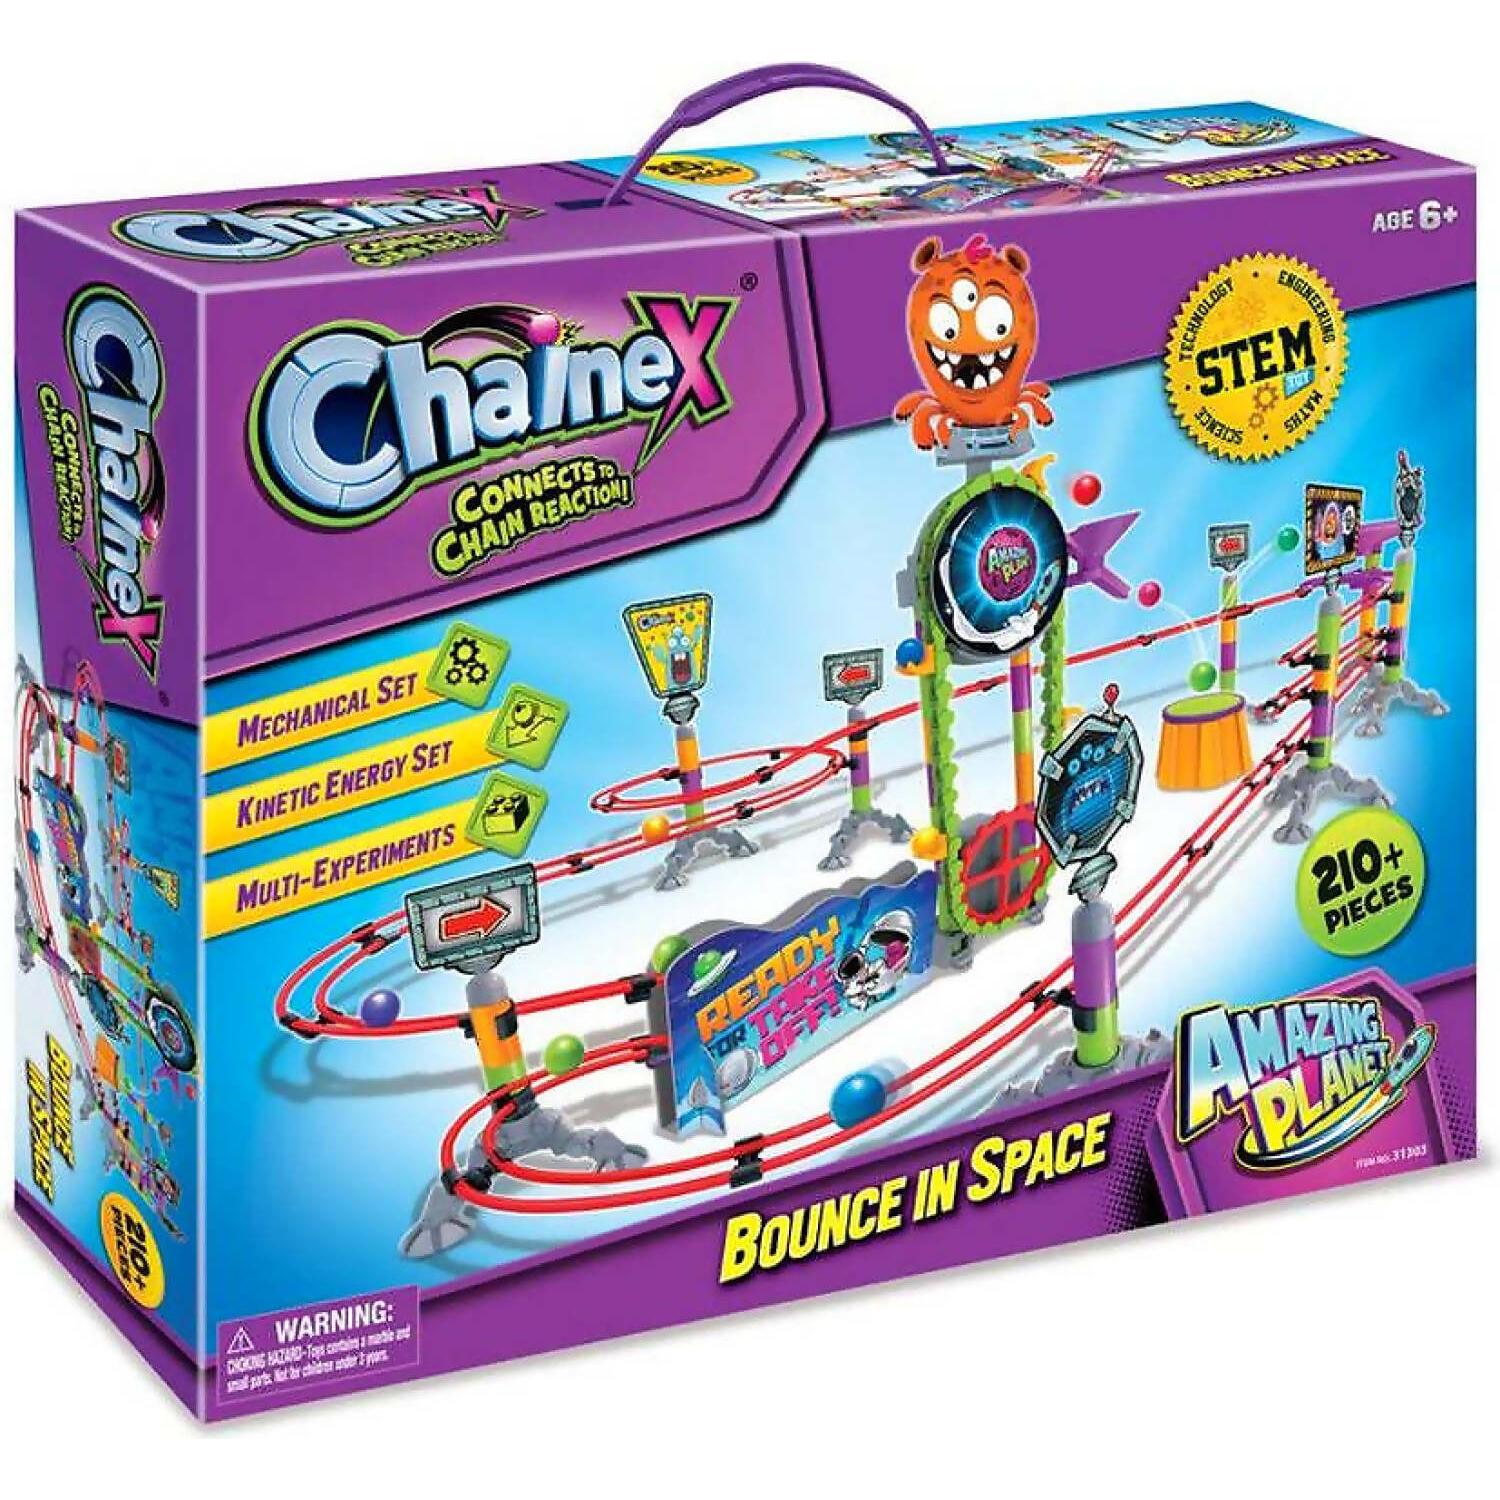 Chainex - Bounce In Space 210+ Pieces from Tates Toyworld